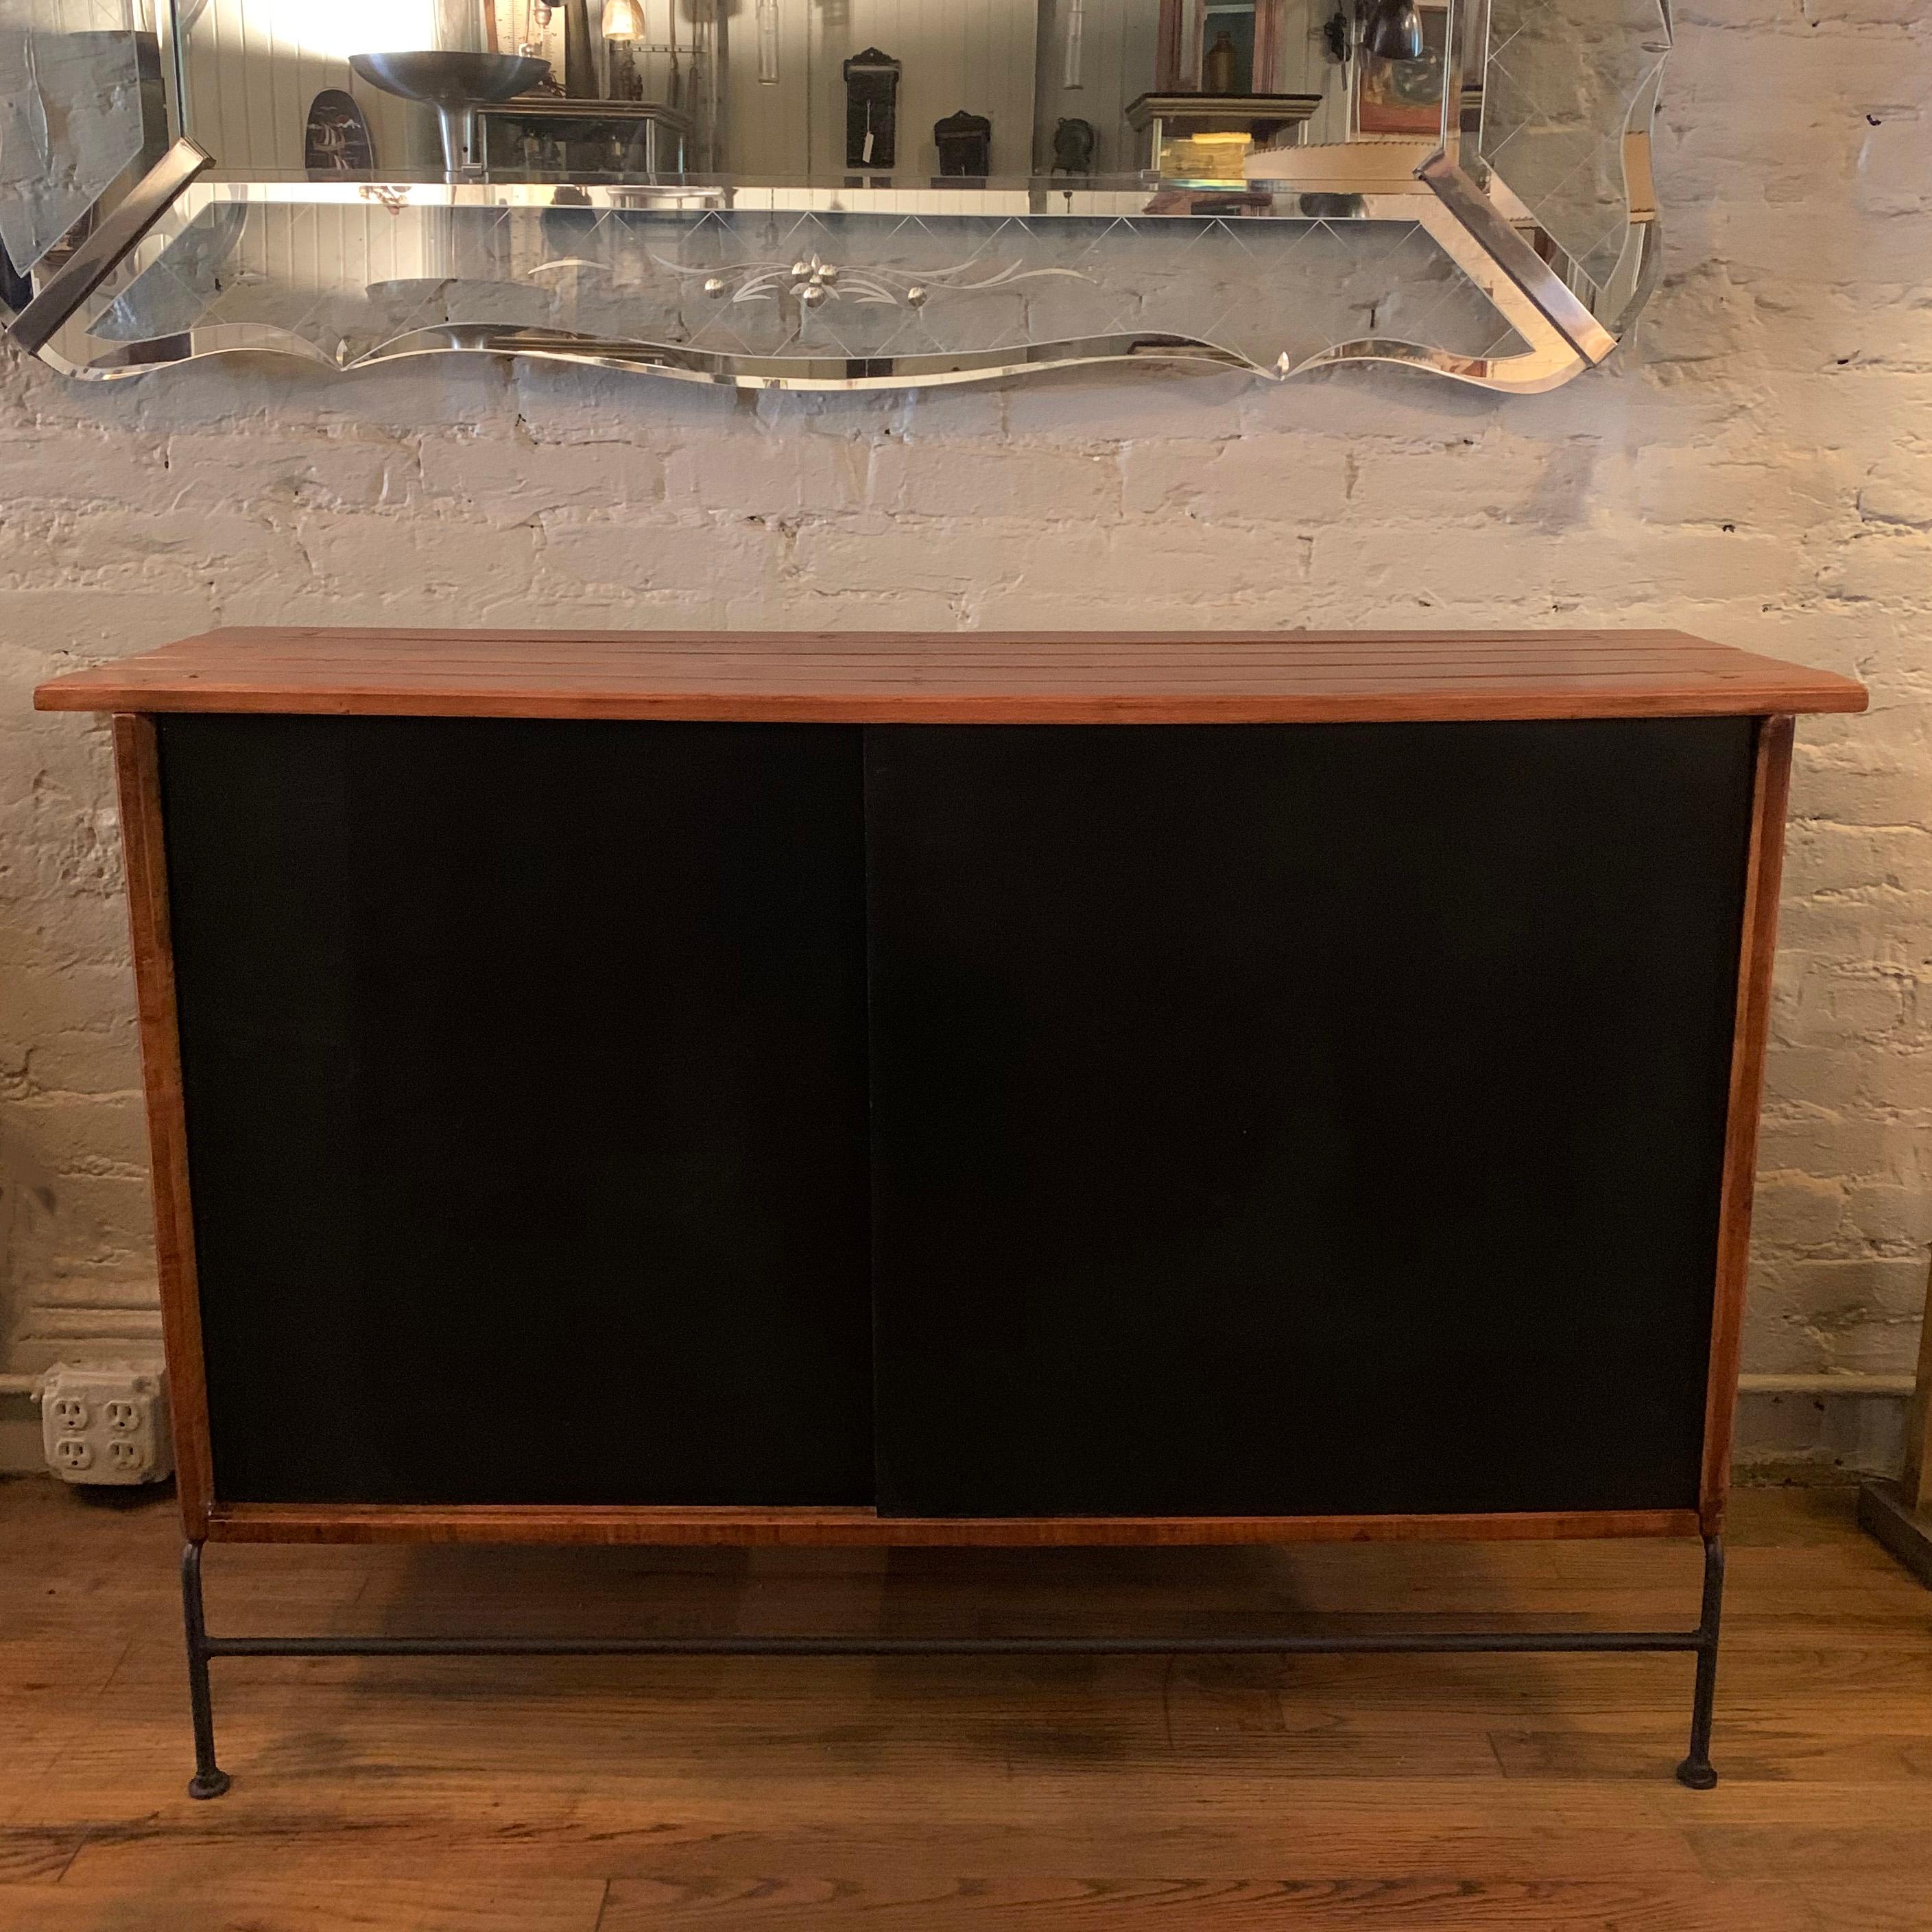 Mid-Century Modern, sideboard, dry bar by Arthur Umanoff features a slat maple surround with black sliding doors on a wrought iron base. Perfect as a shallow sideboard or bar cabinet.